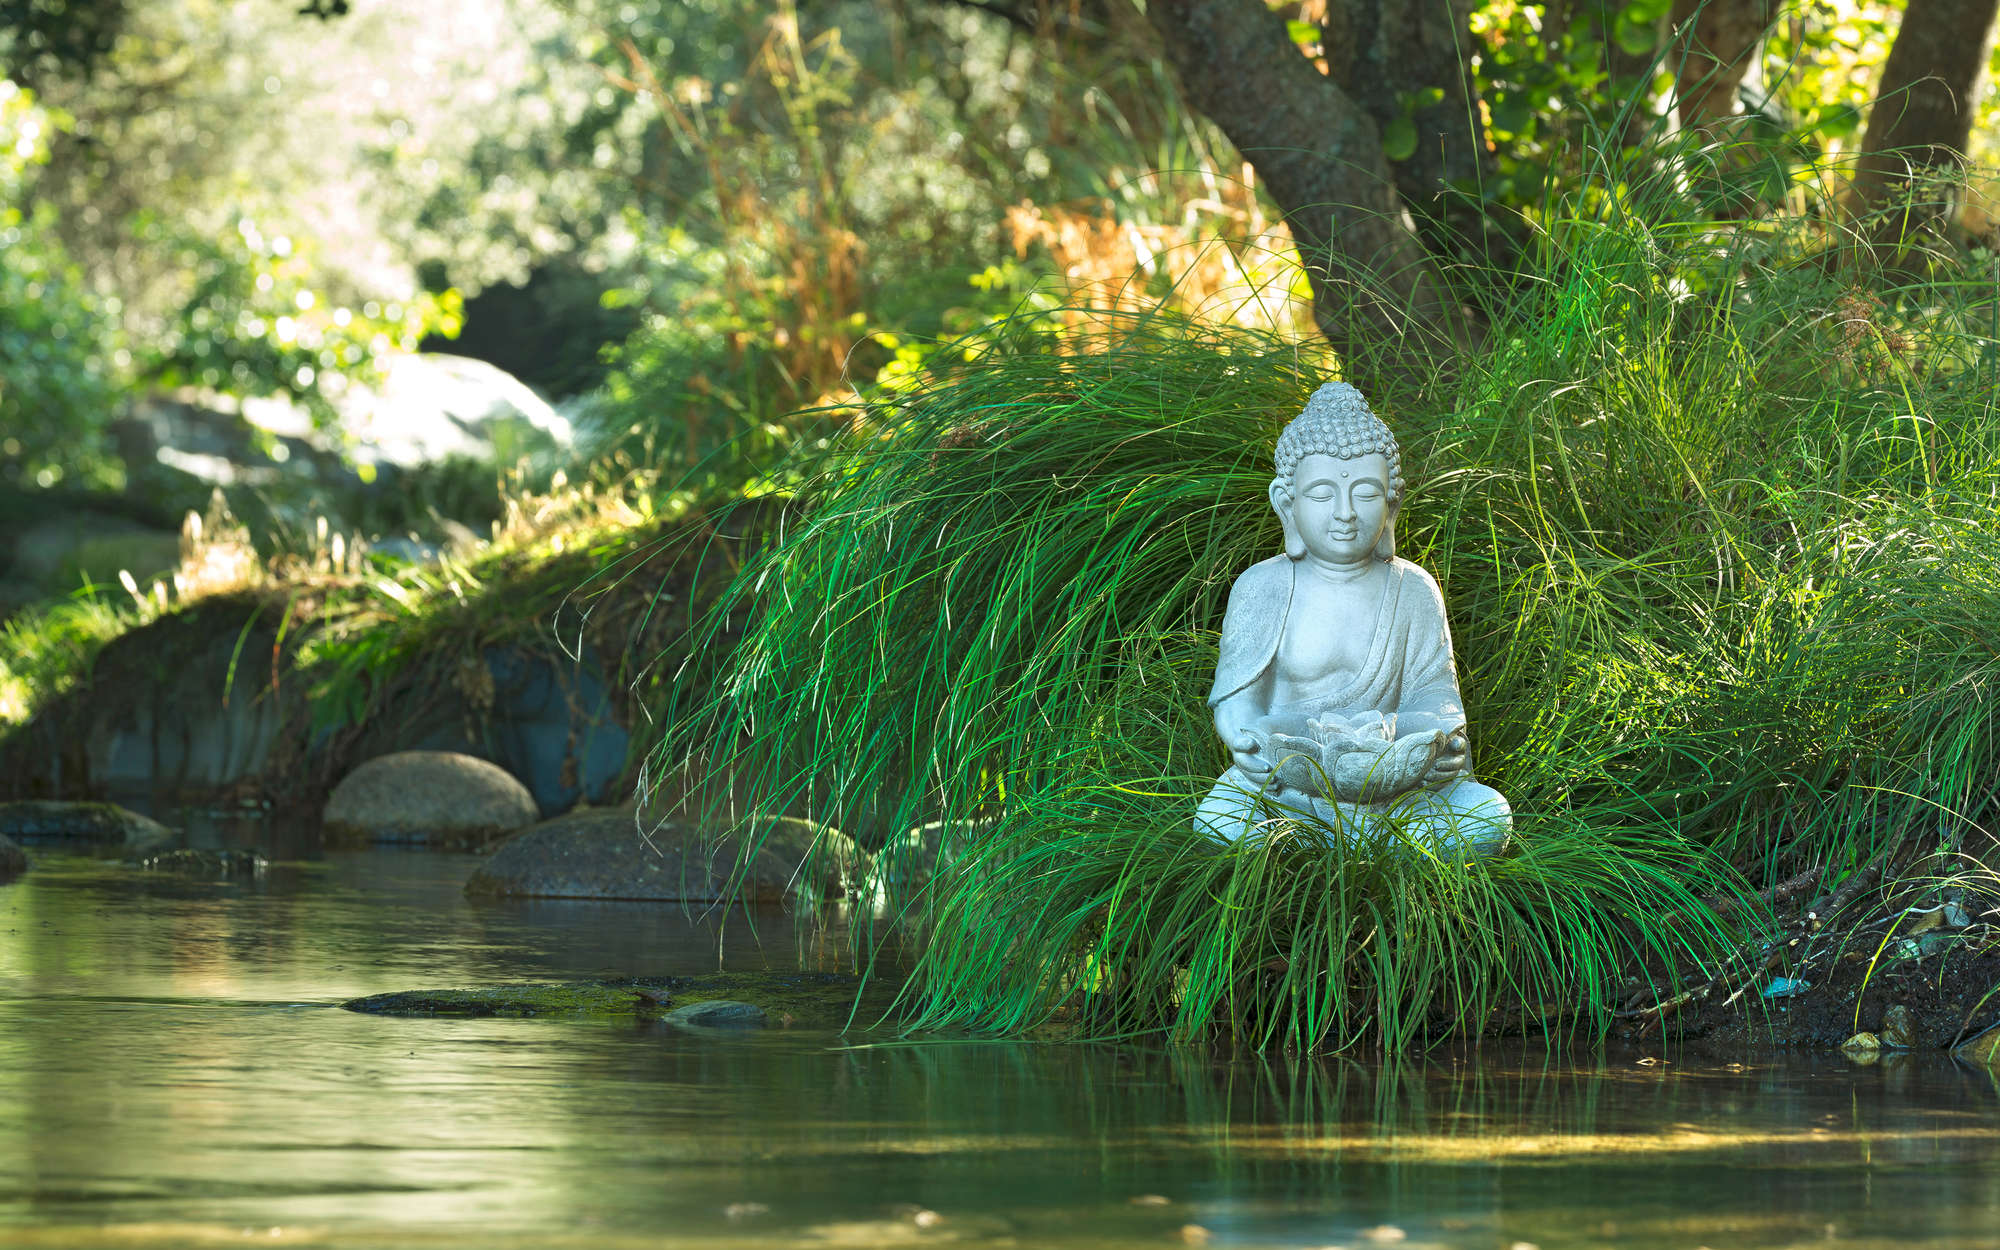             Photo wallpaper Buddha Statue on the Riverbank - Mother of Pearl Smooth Non-woven
        